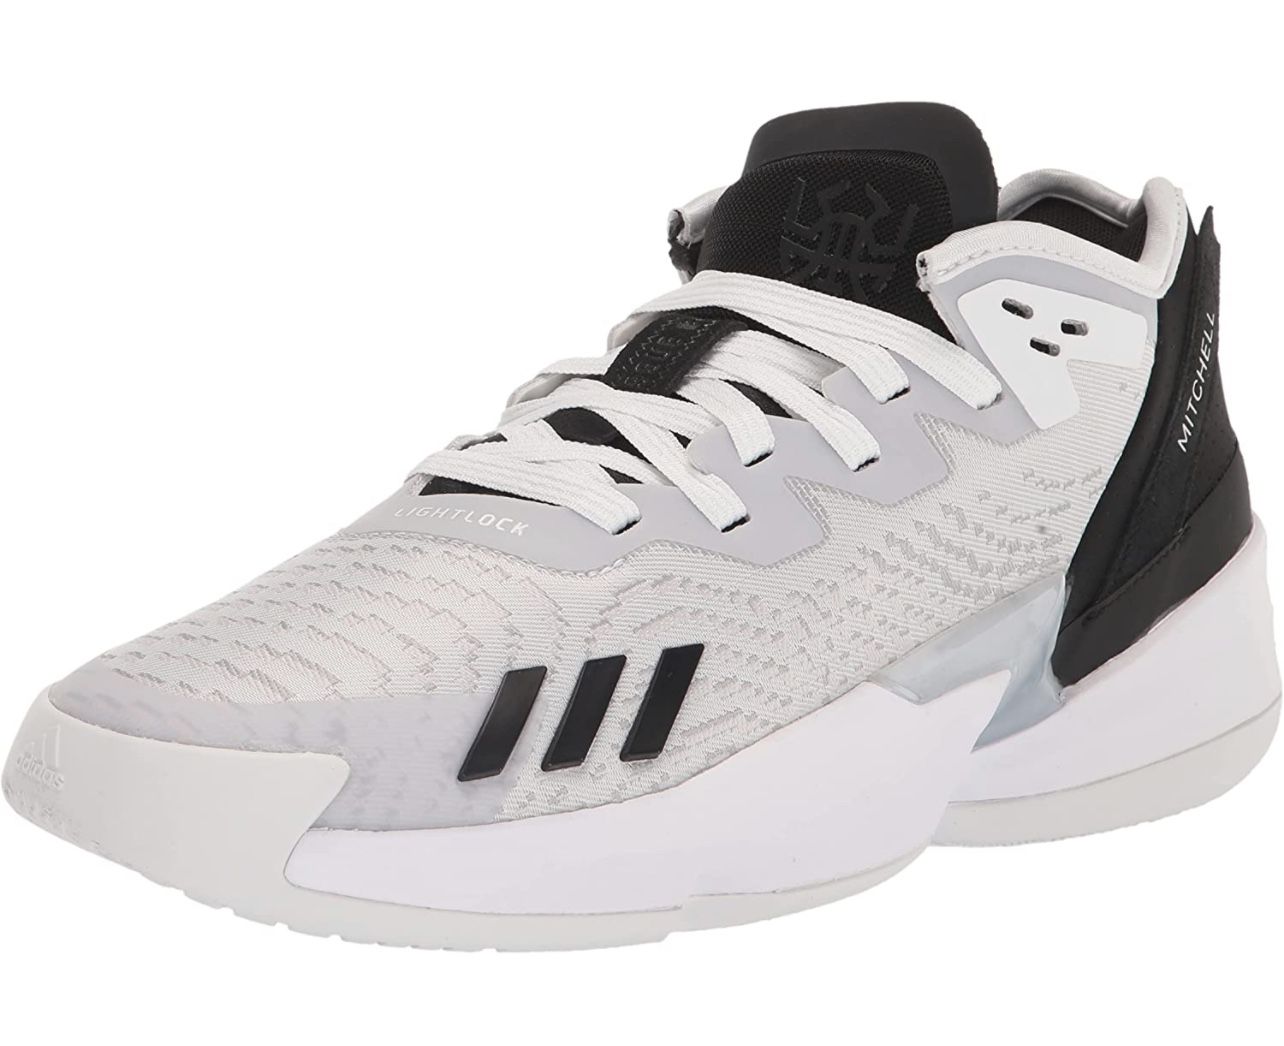 Adidas Unisex-Adult D.o.n. Issue 4 Basketball Shoe, All Sizes are Available 